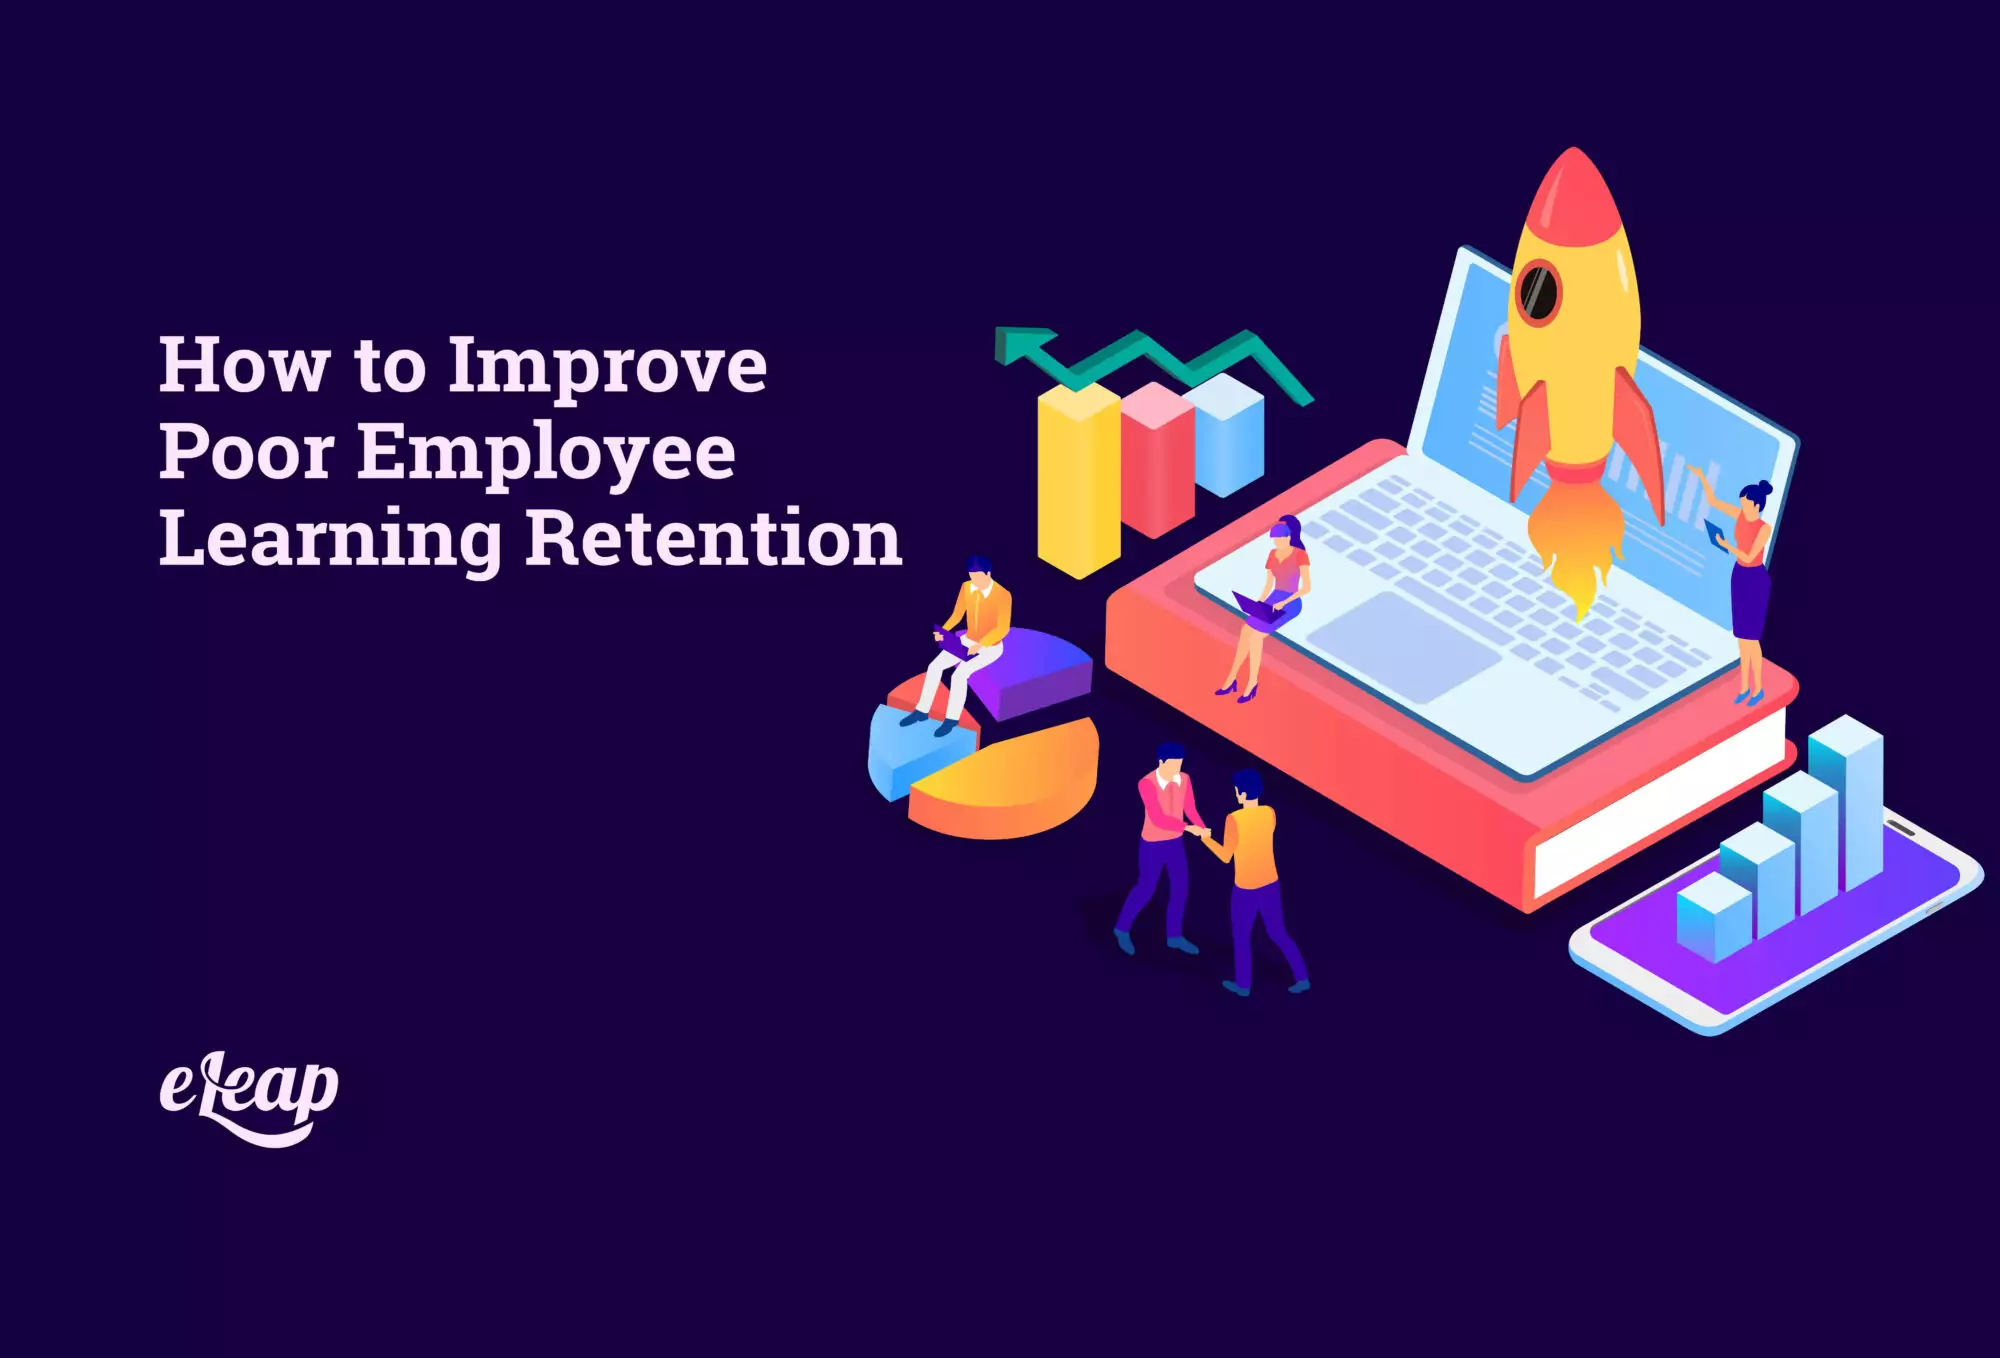 How to Improve Poor Employee Learning Retention